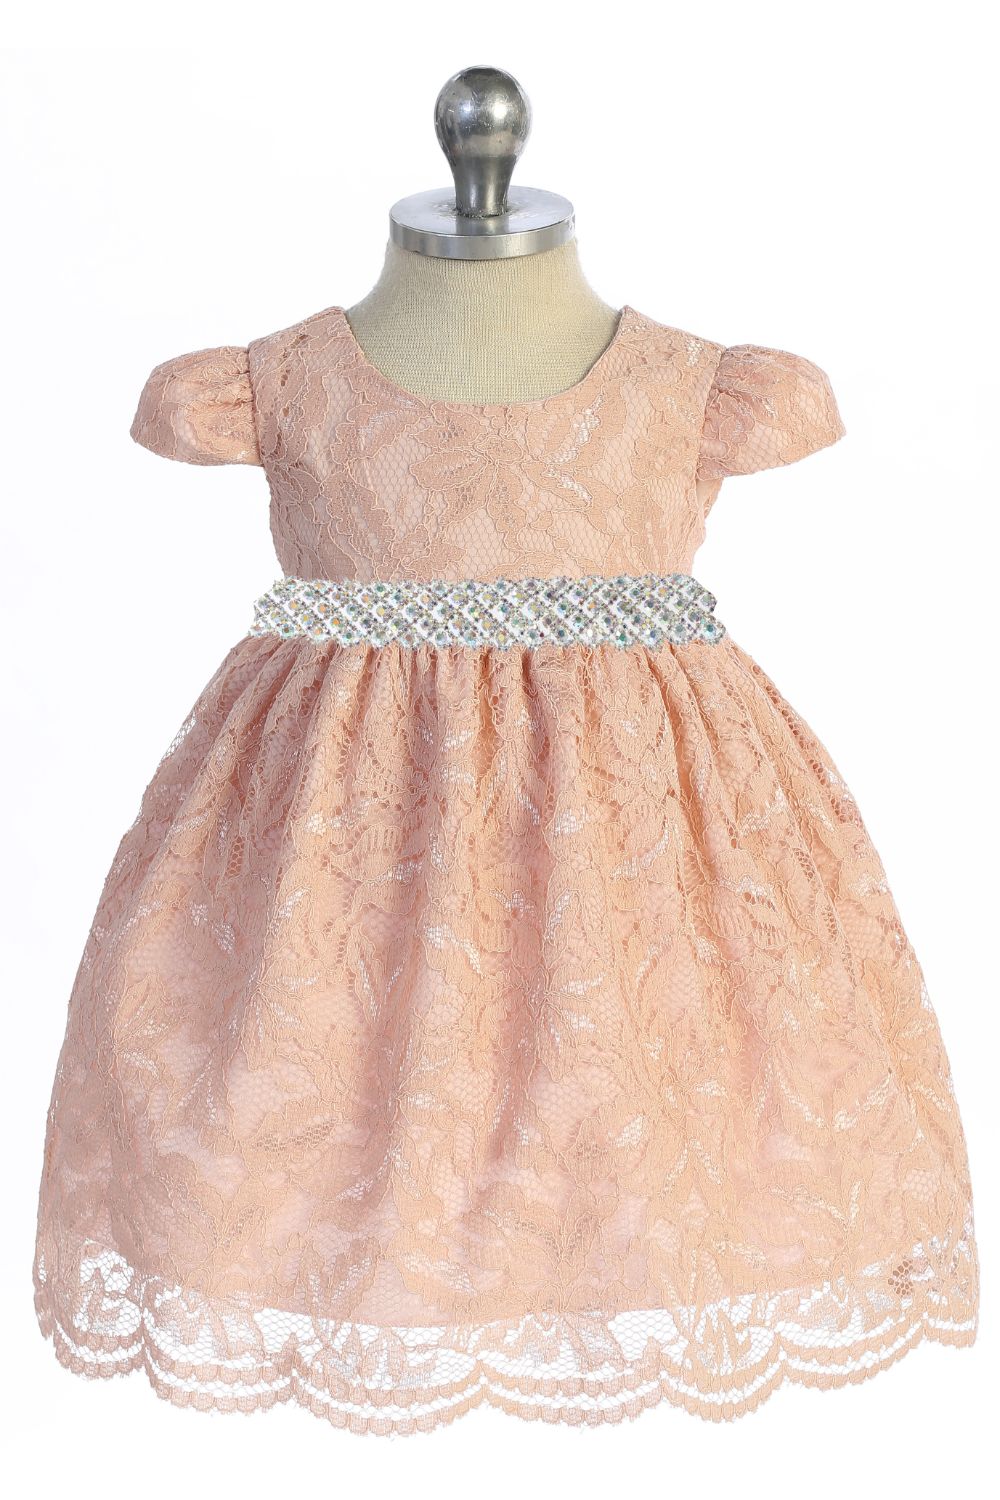 532-E All Lace Baby Dress with V Back & Bow and Thick Rhinestone Trim